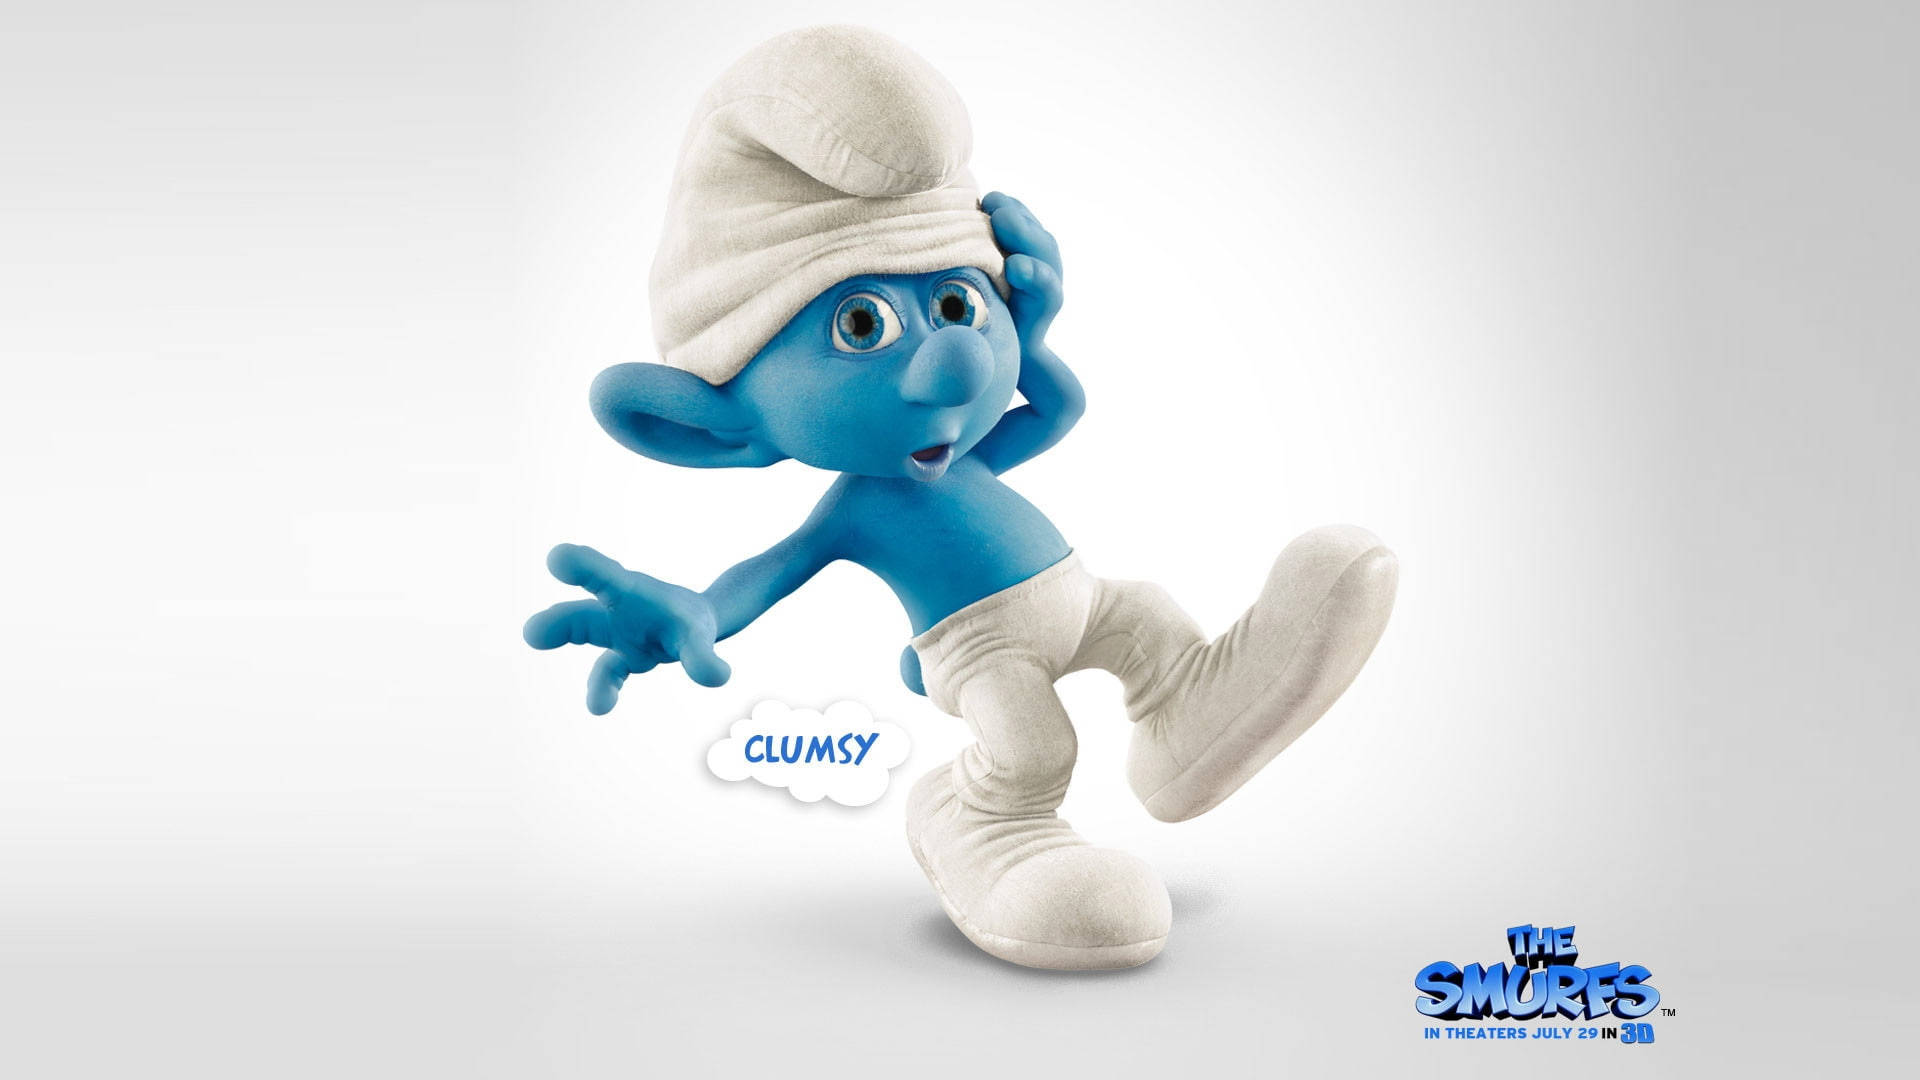 The Smurfs Clumsy Smurf Wallpaper